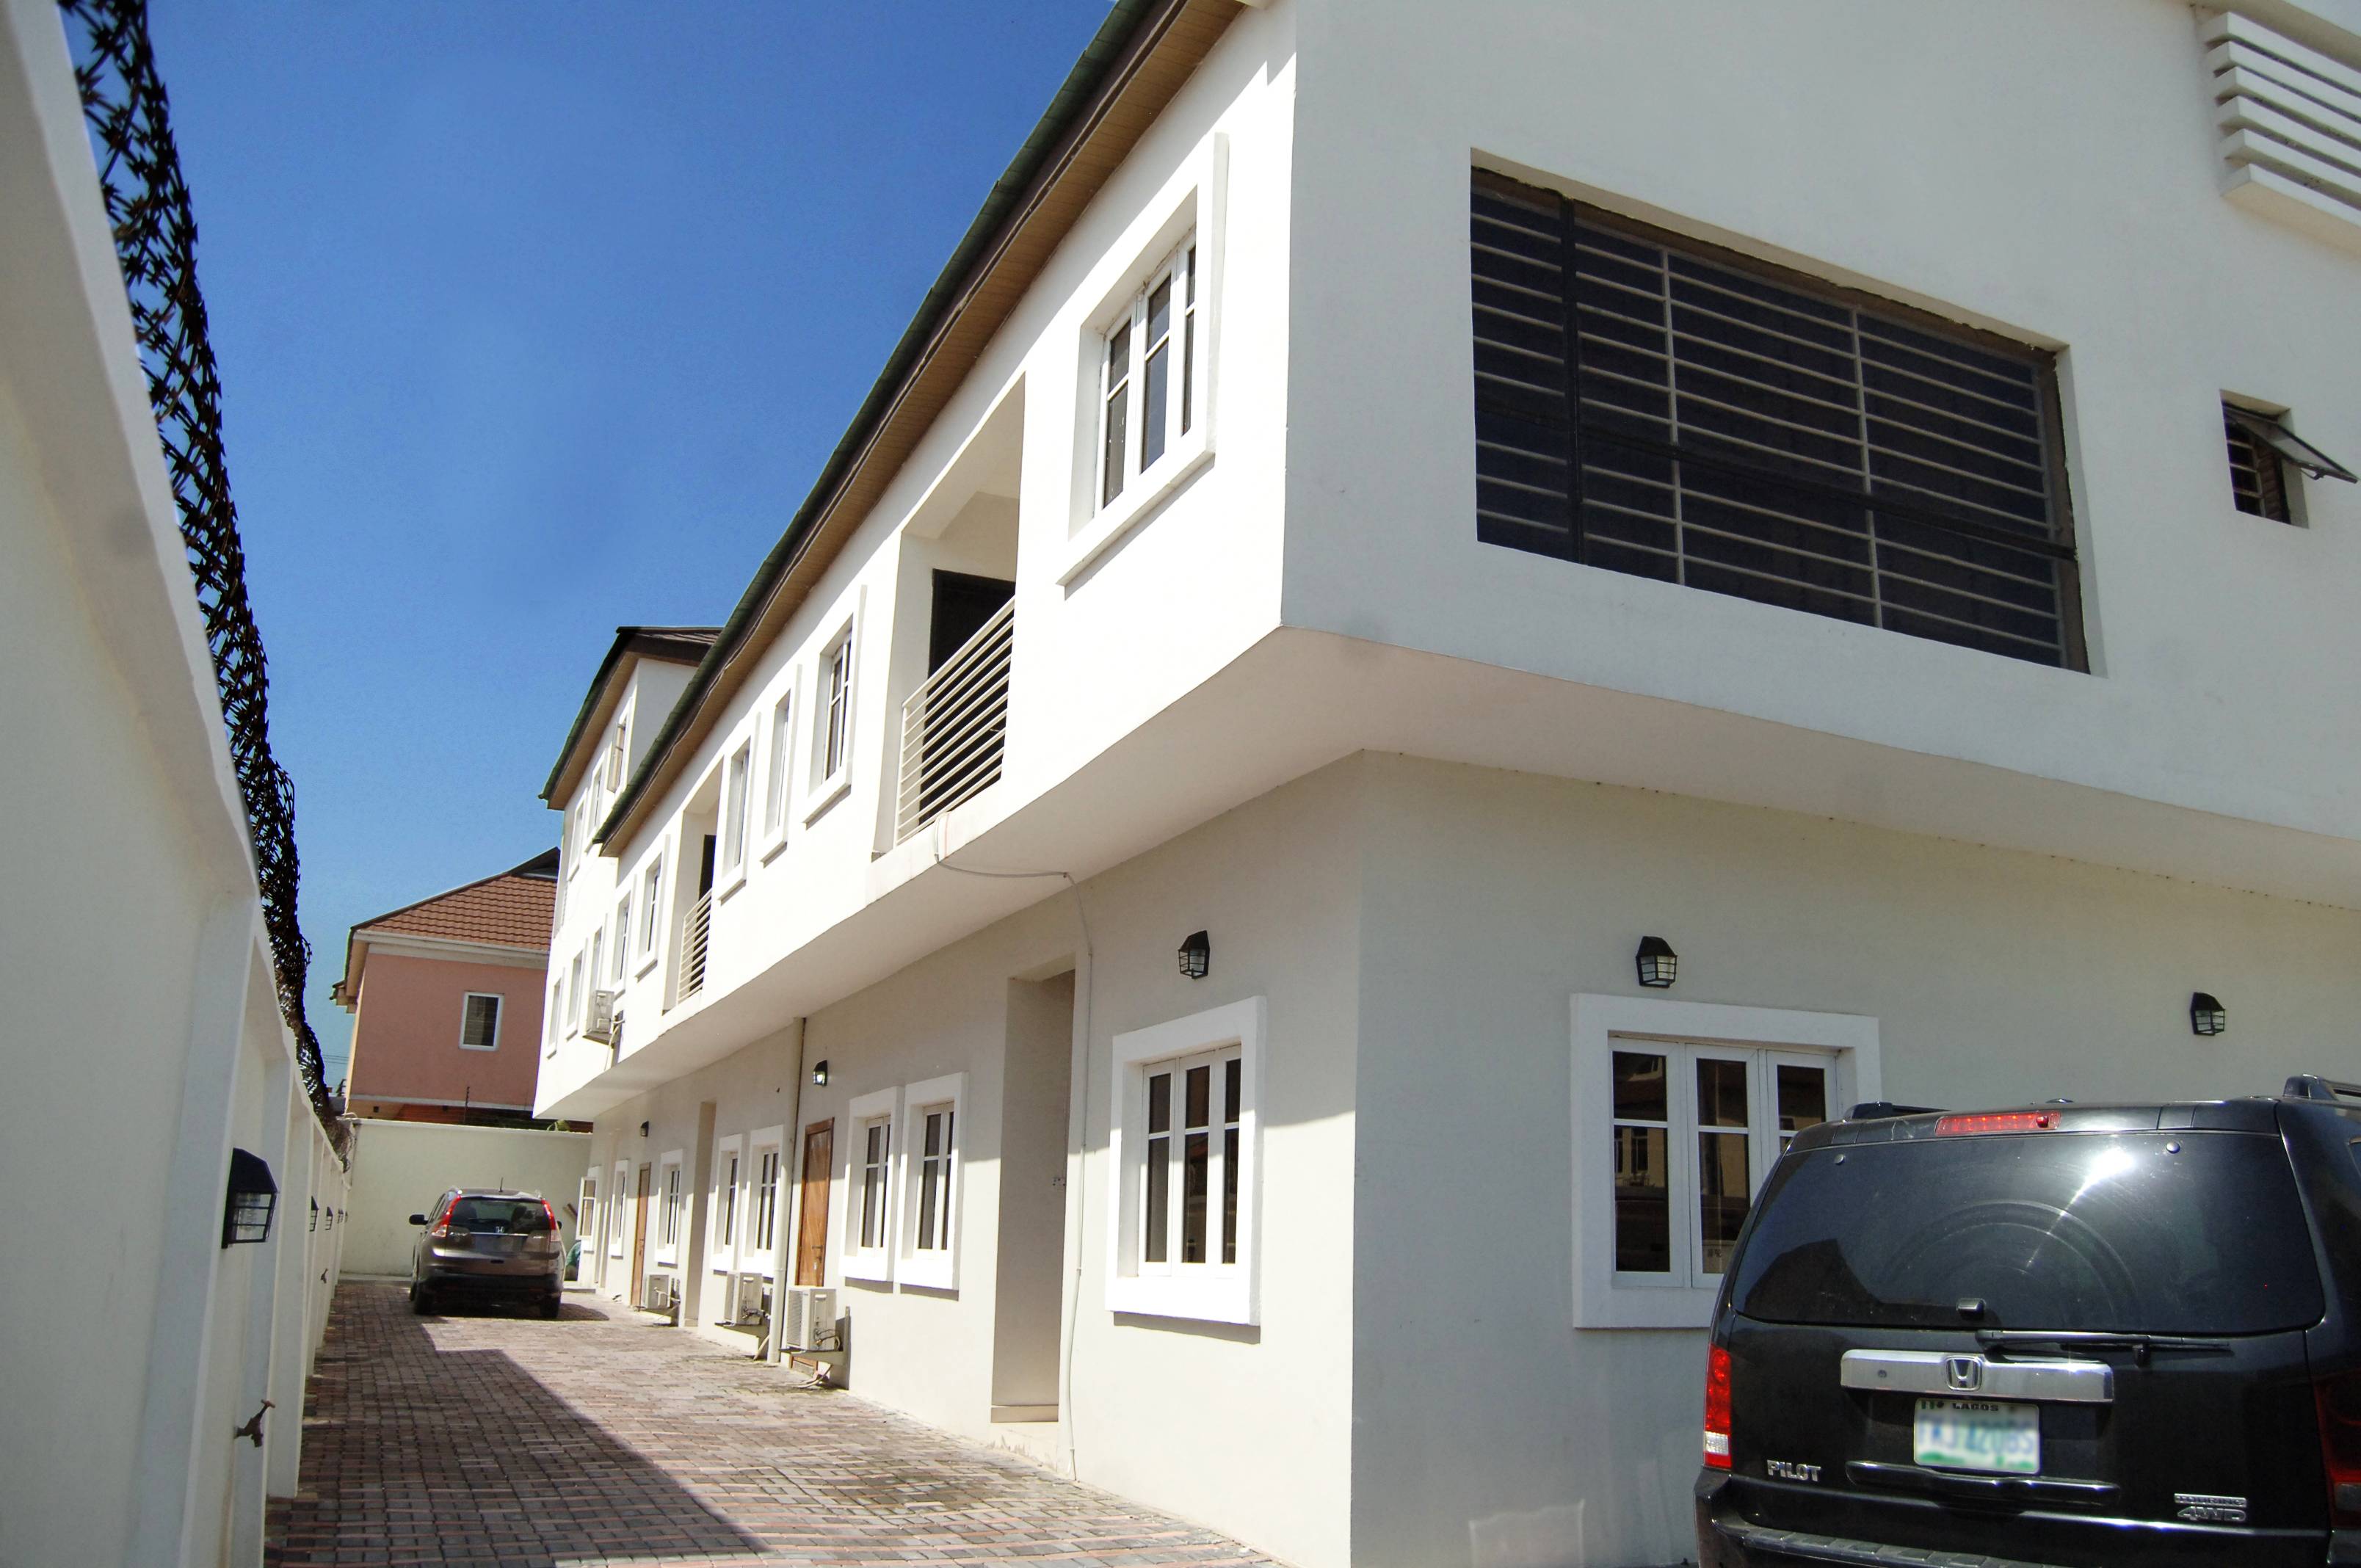 Simple Apartment Hotels In Lagos Nigeria for Large Space